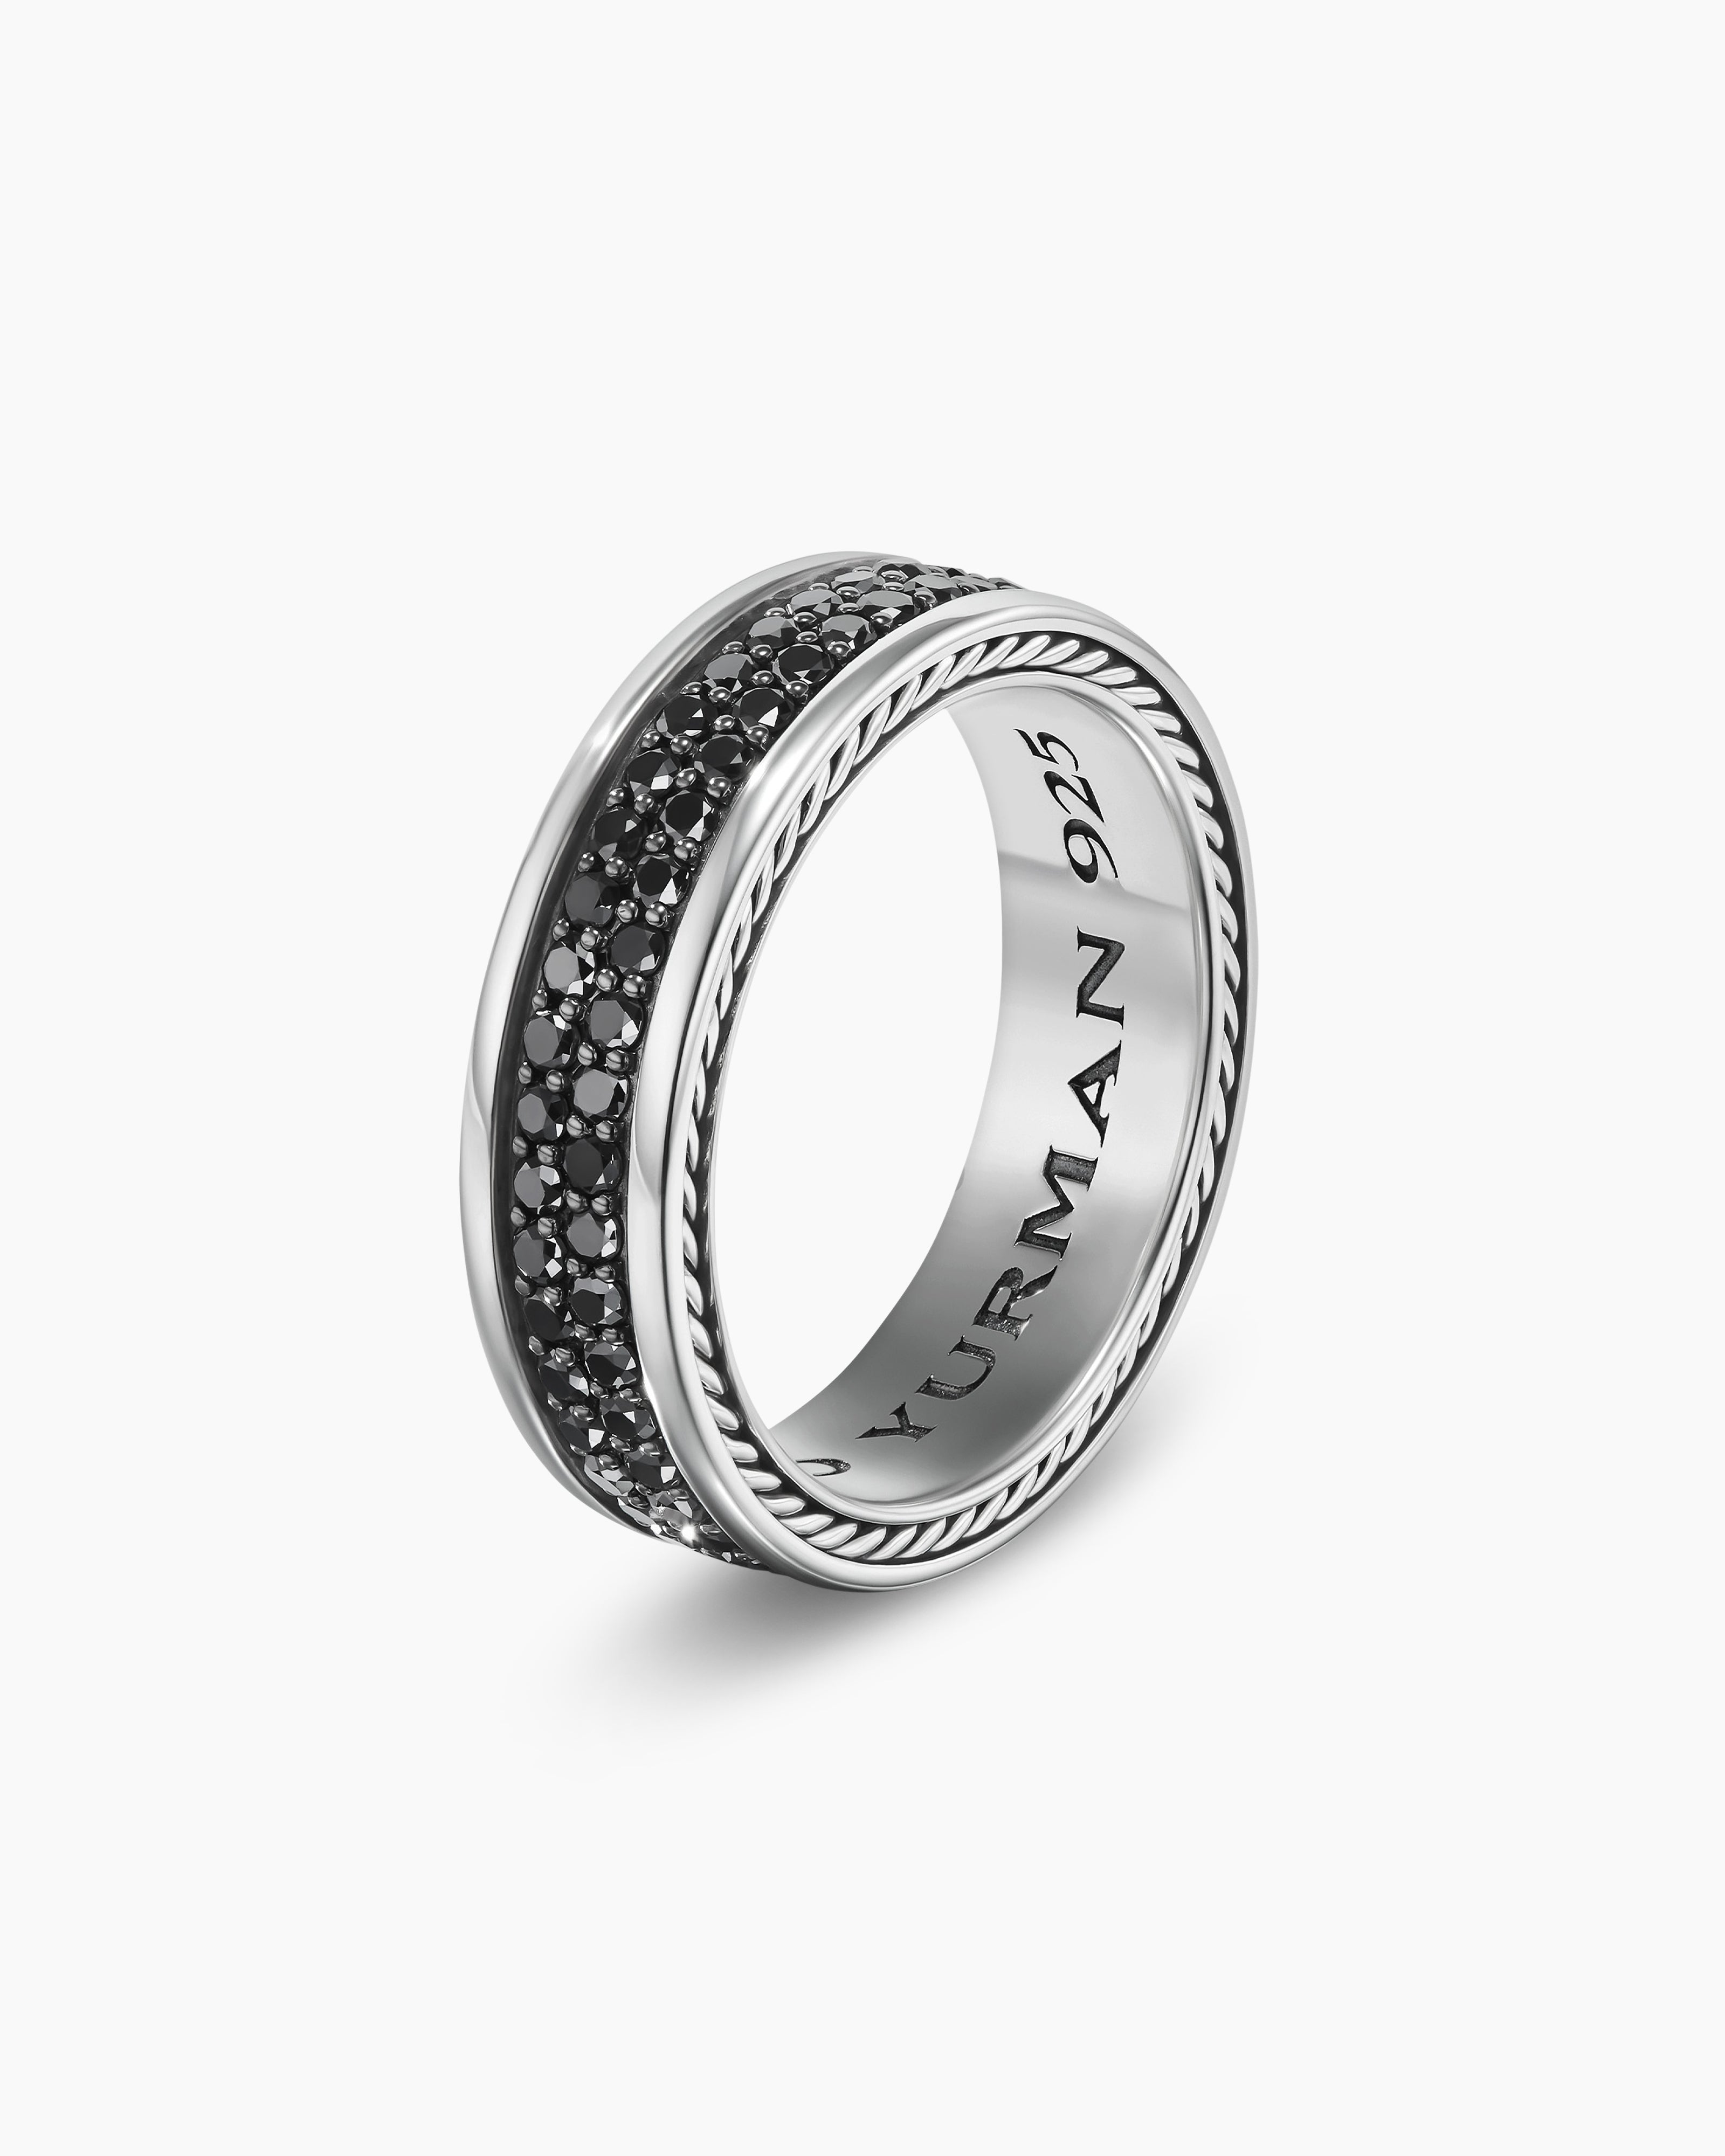 Silver, Black Black Onyx Ring For Men at Rs 900/piece in Jaipur | ID:  4390106788